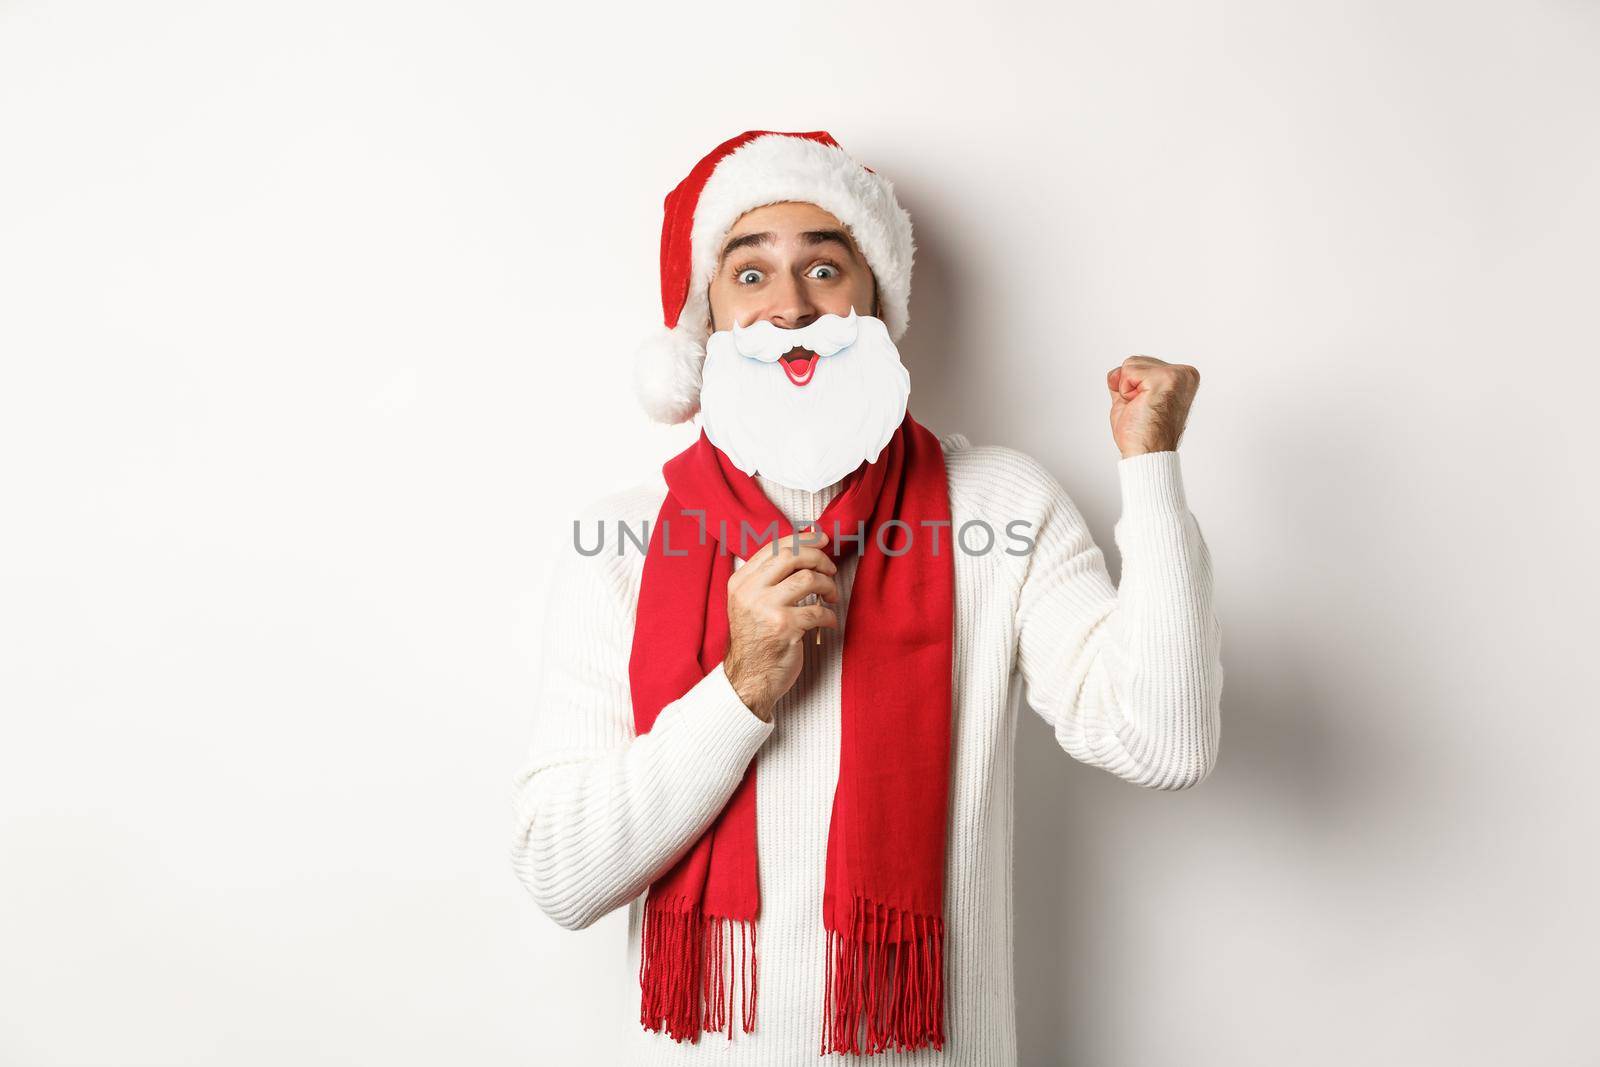 Christmas party and celebration concept. Excited young man enjoying New Year, looking funny in Santa hat with white beard mask, making fist pump and rejoicing.